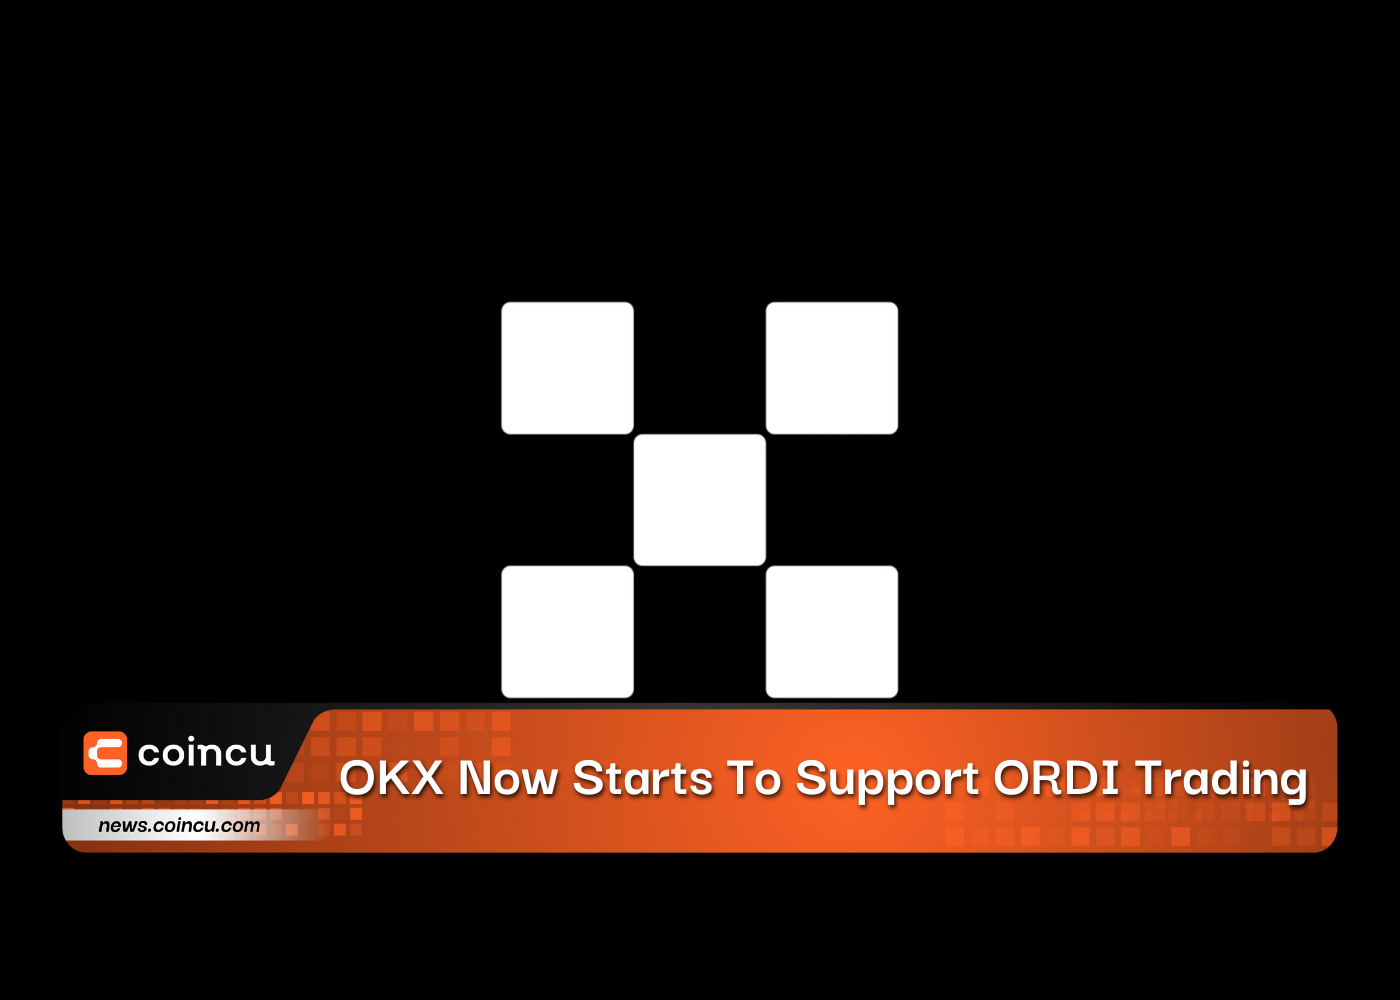 OKX Now Starts To Support ORDI Trading